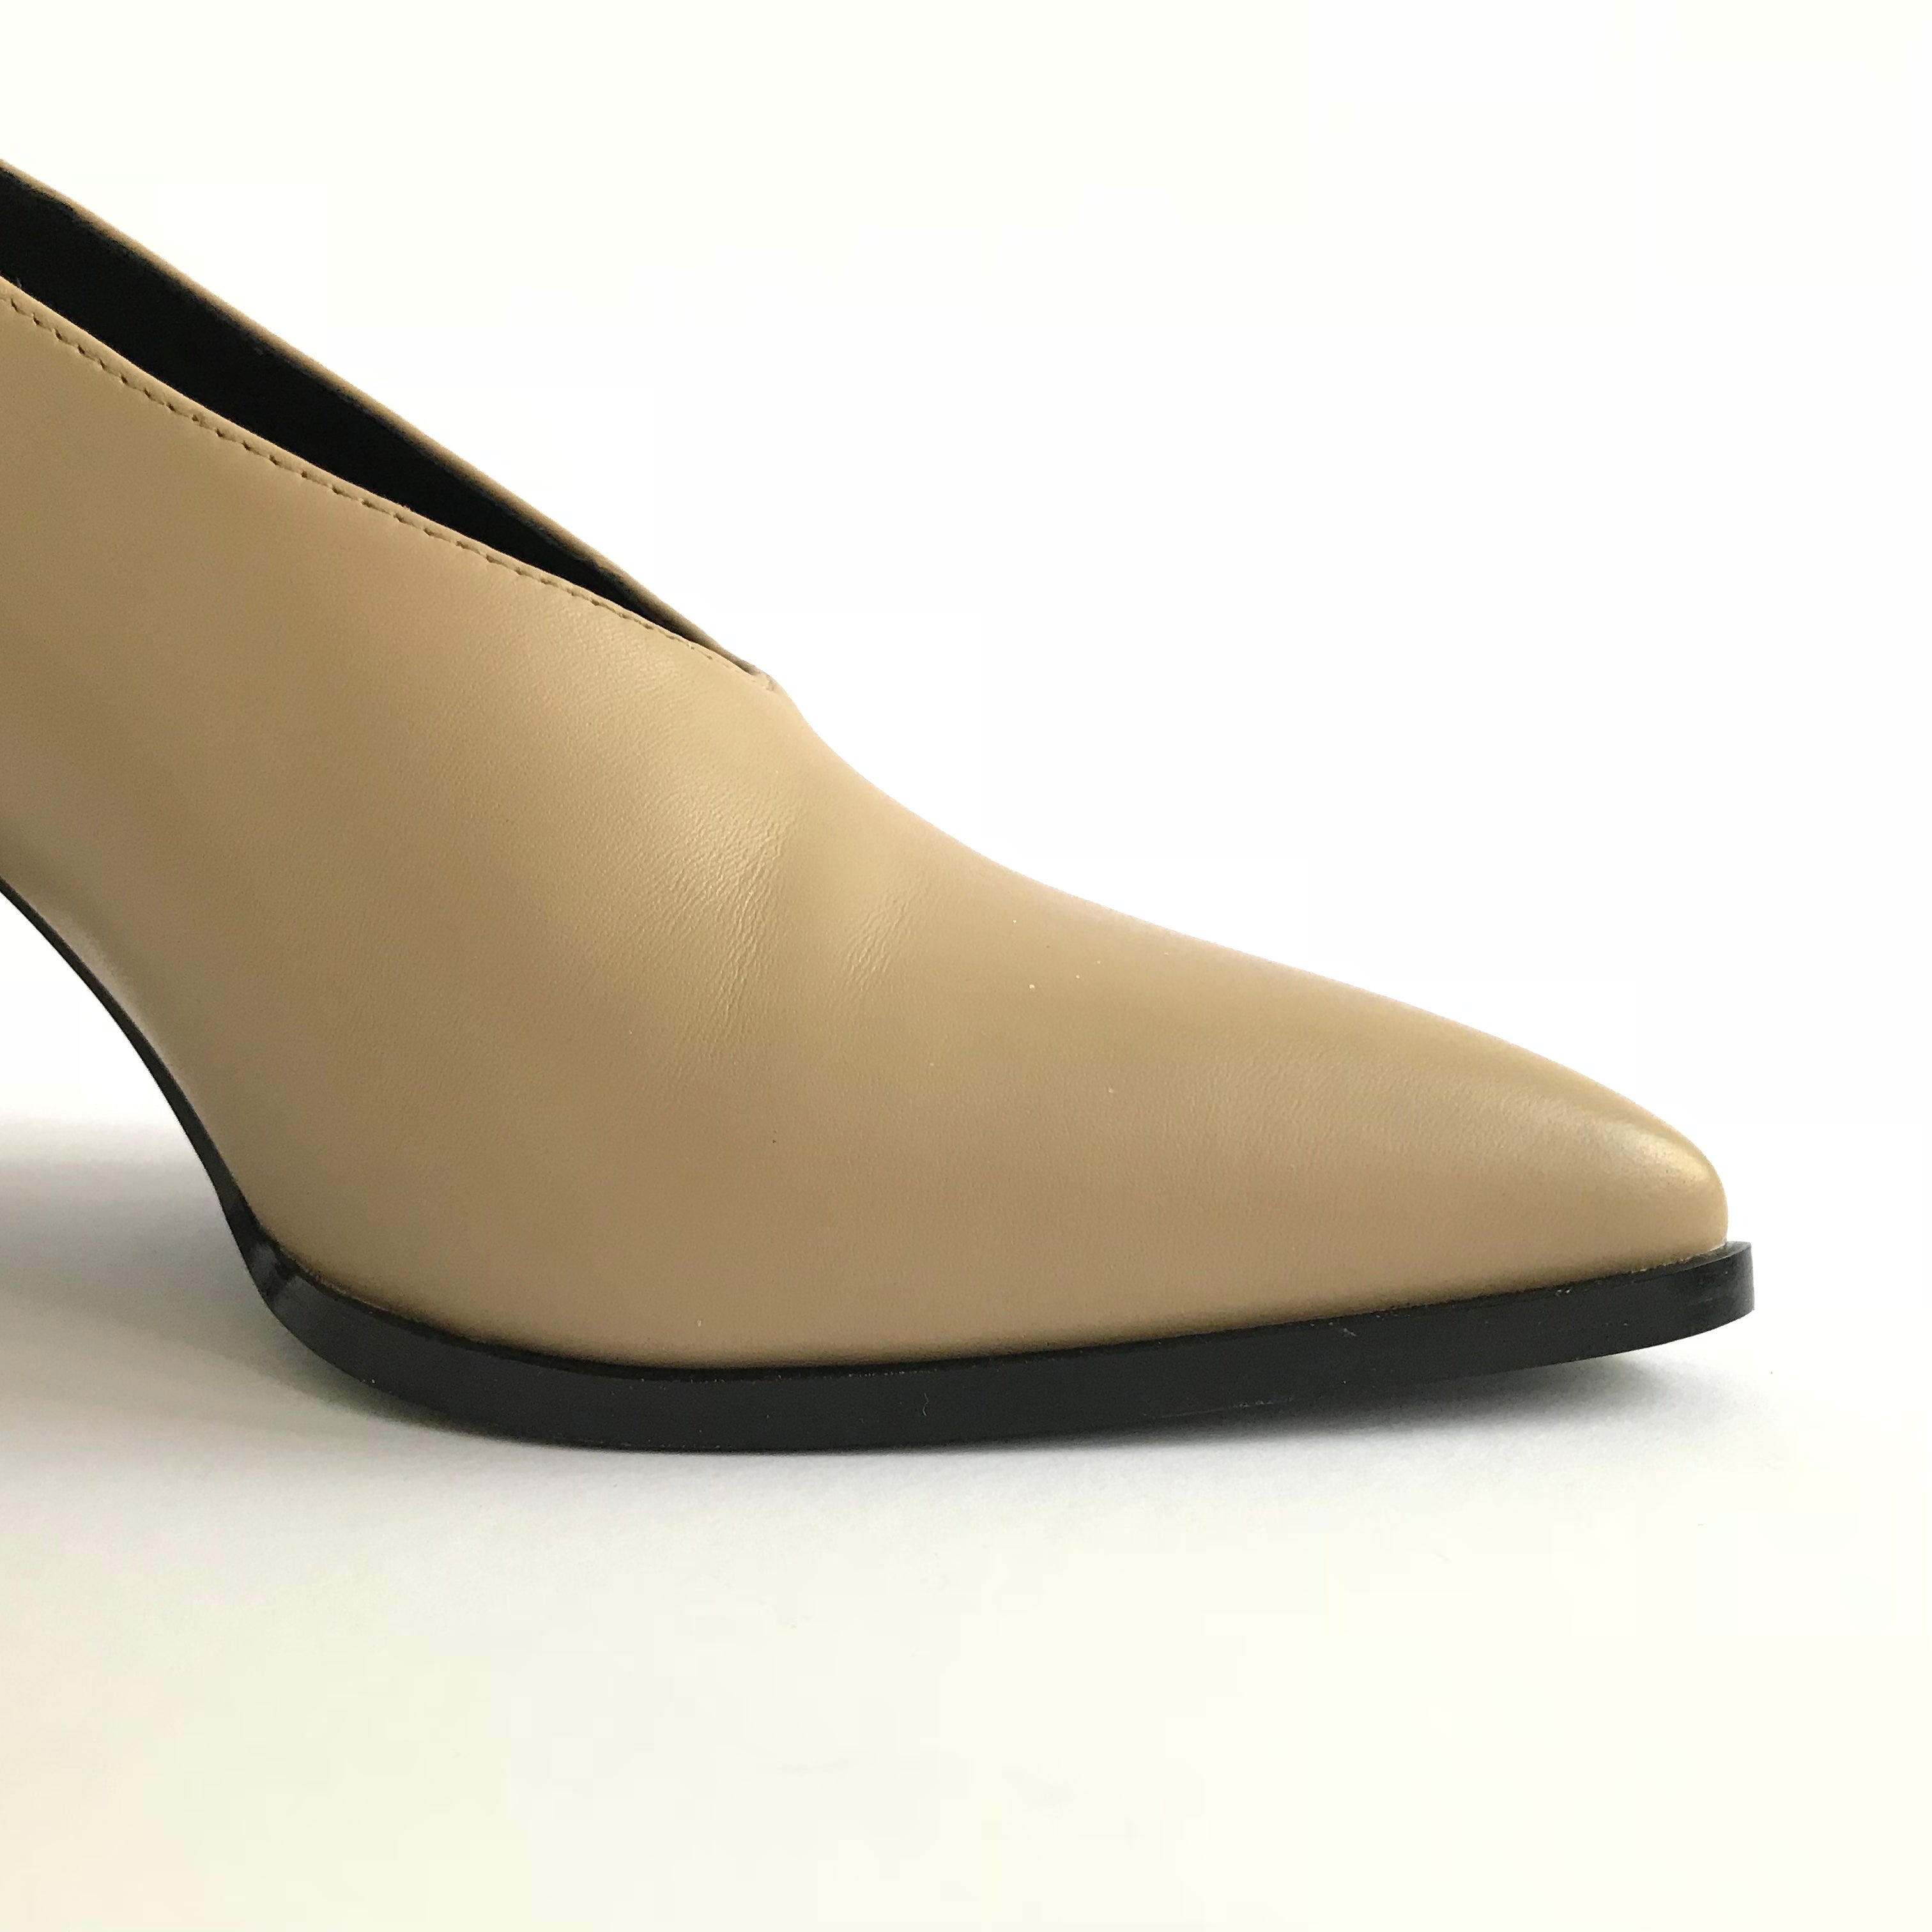 Side detail of Roach Killer V-cut pump from Swedish shoe brand ANNY NORD.  A classic shoe with a modern twist. 